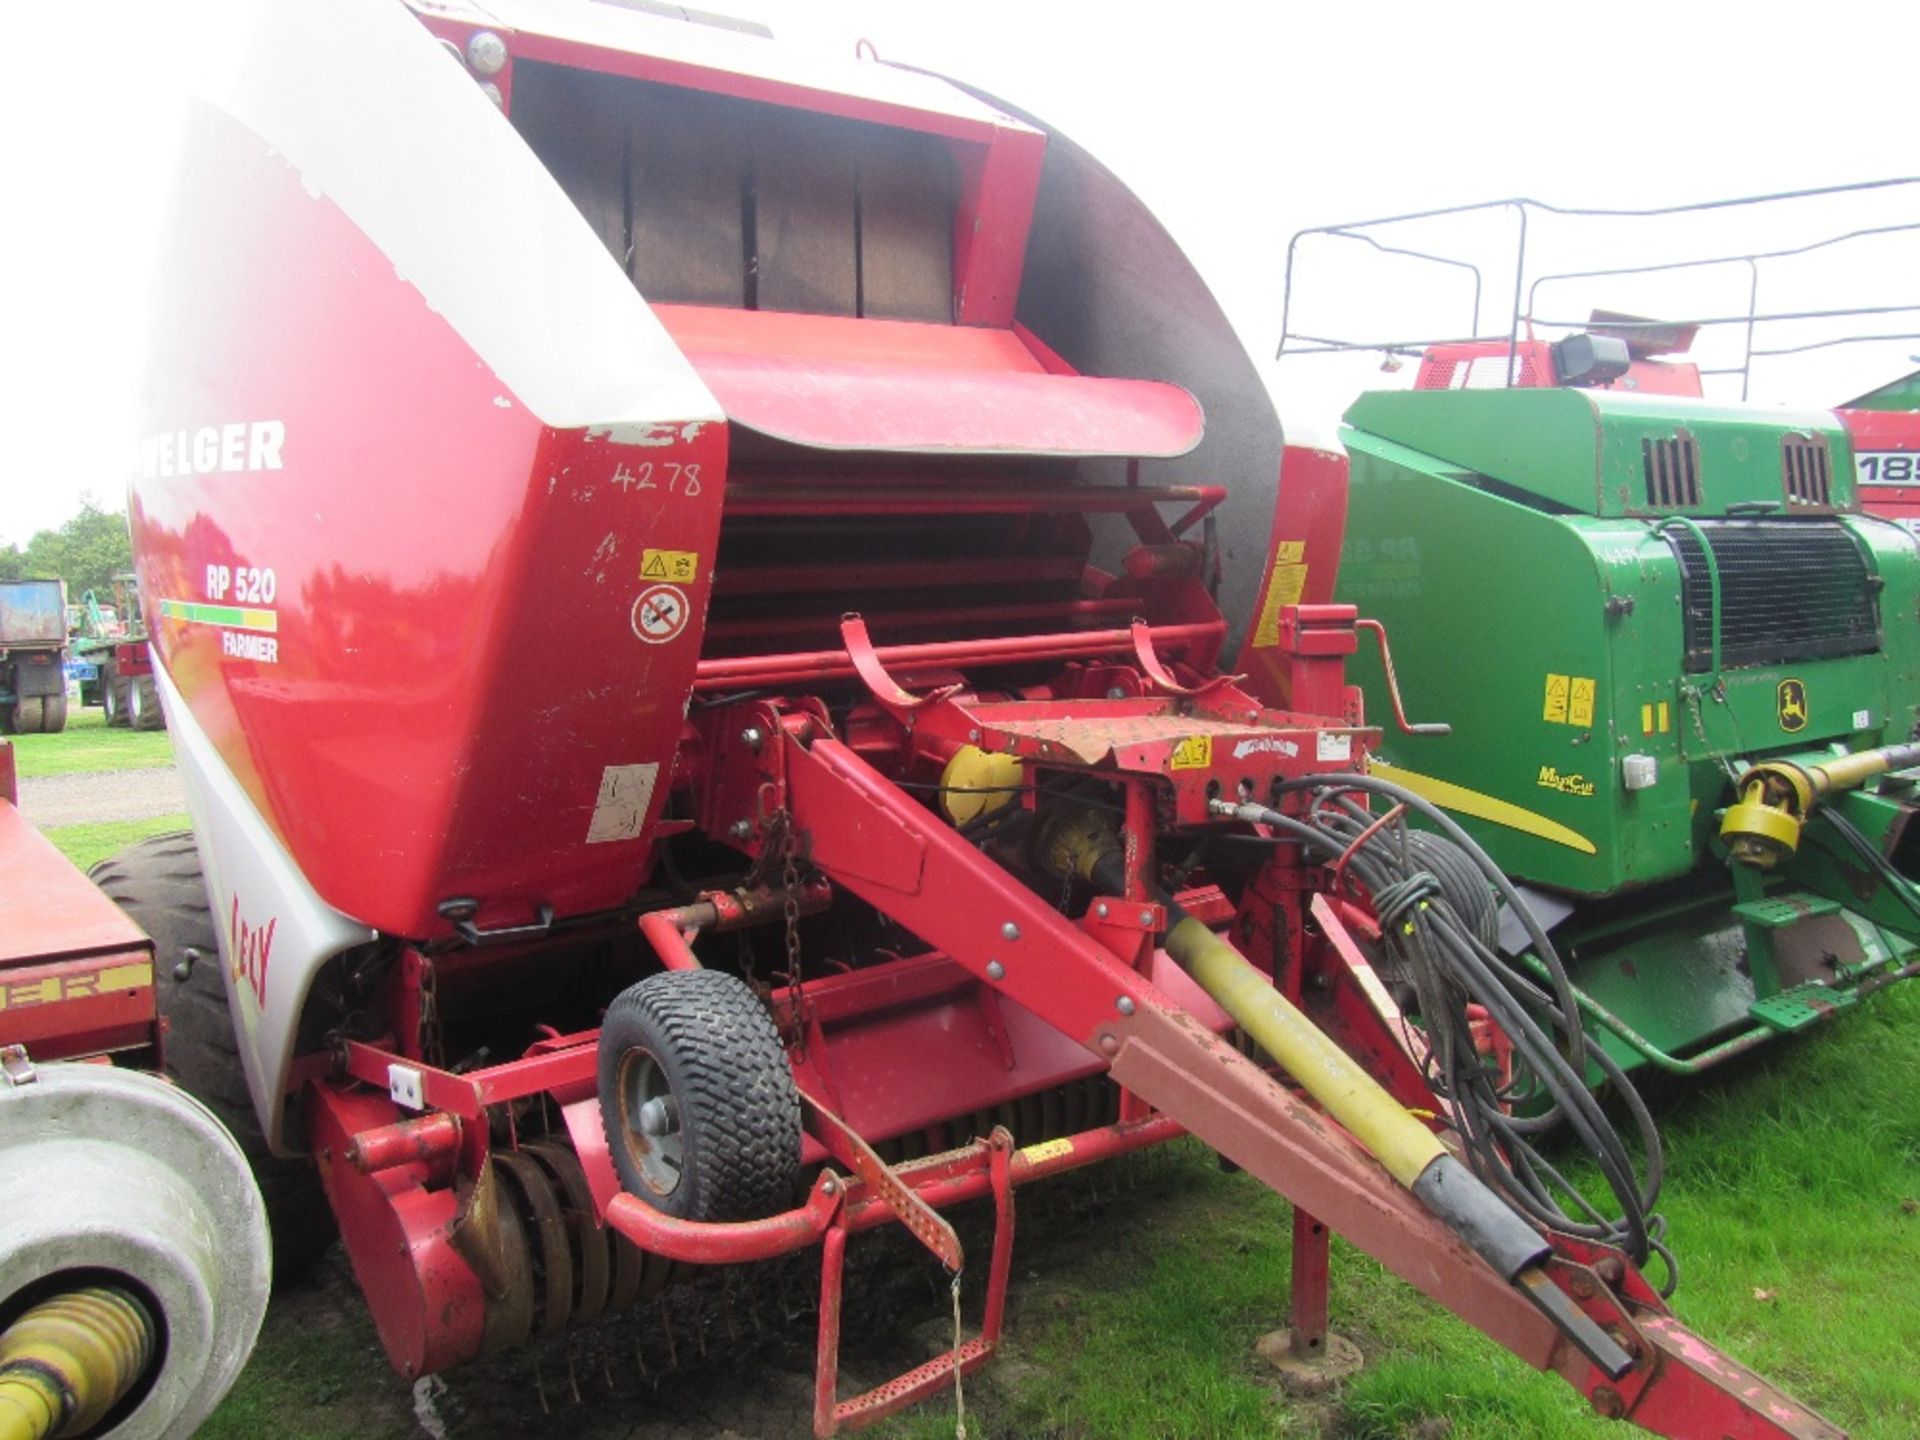 Welger RP520 Baler. Control box in office - Image 2 of 5